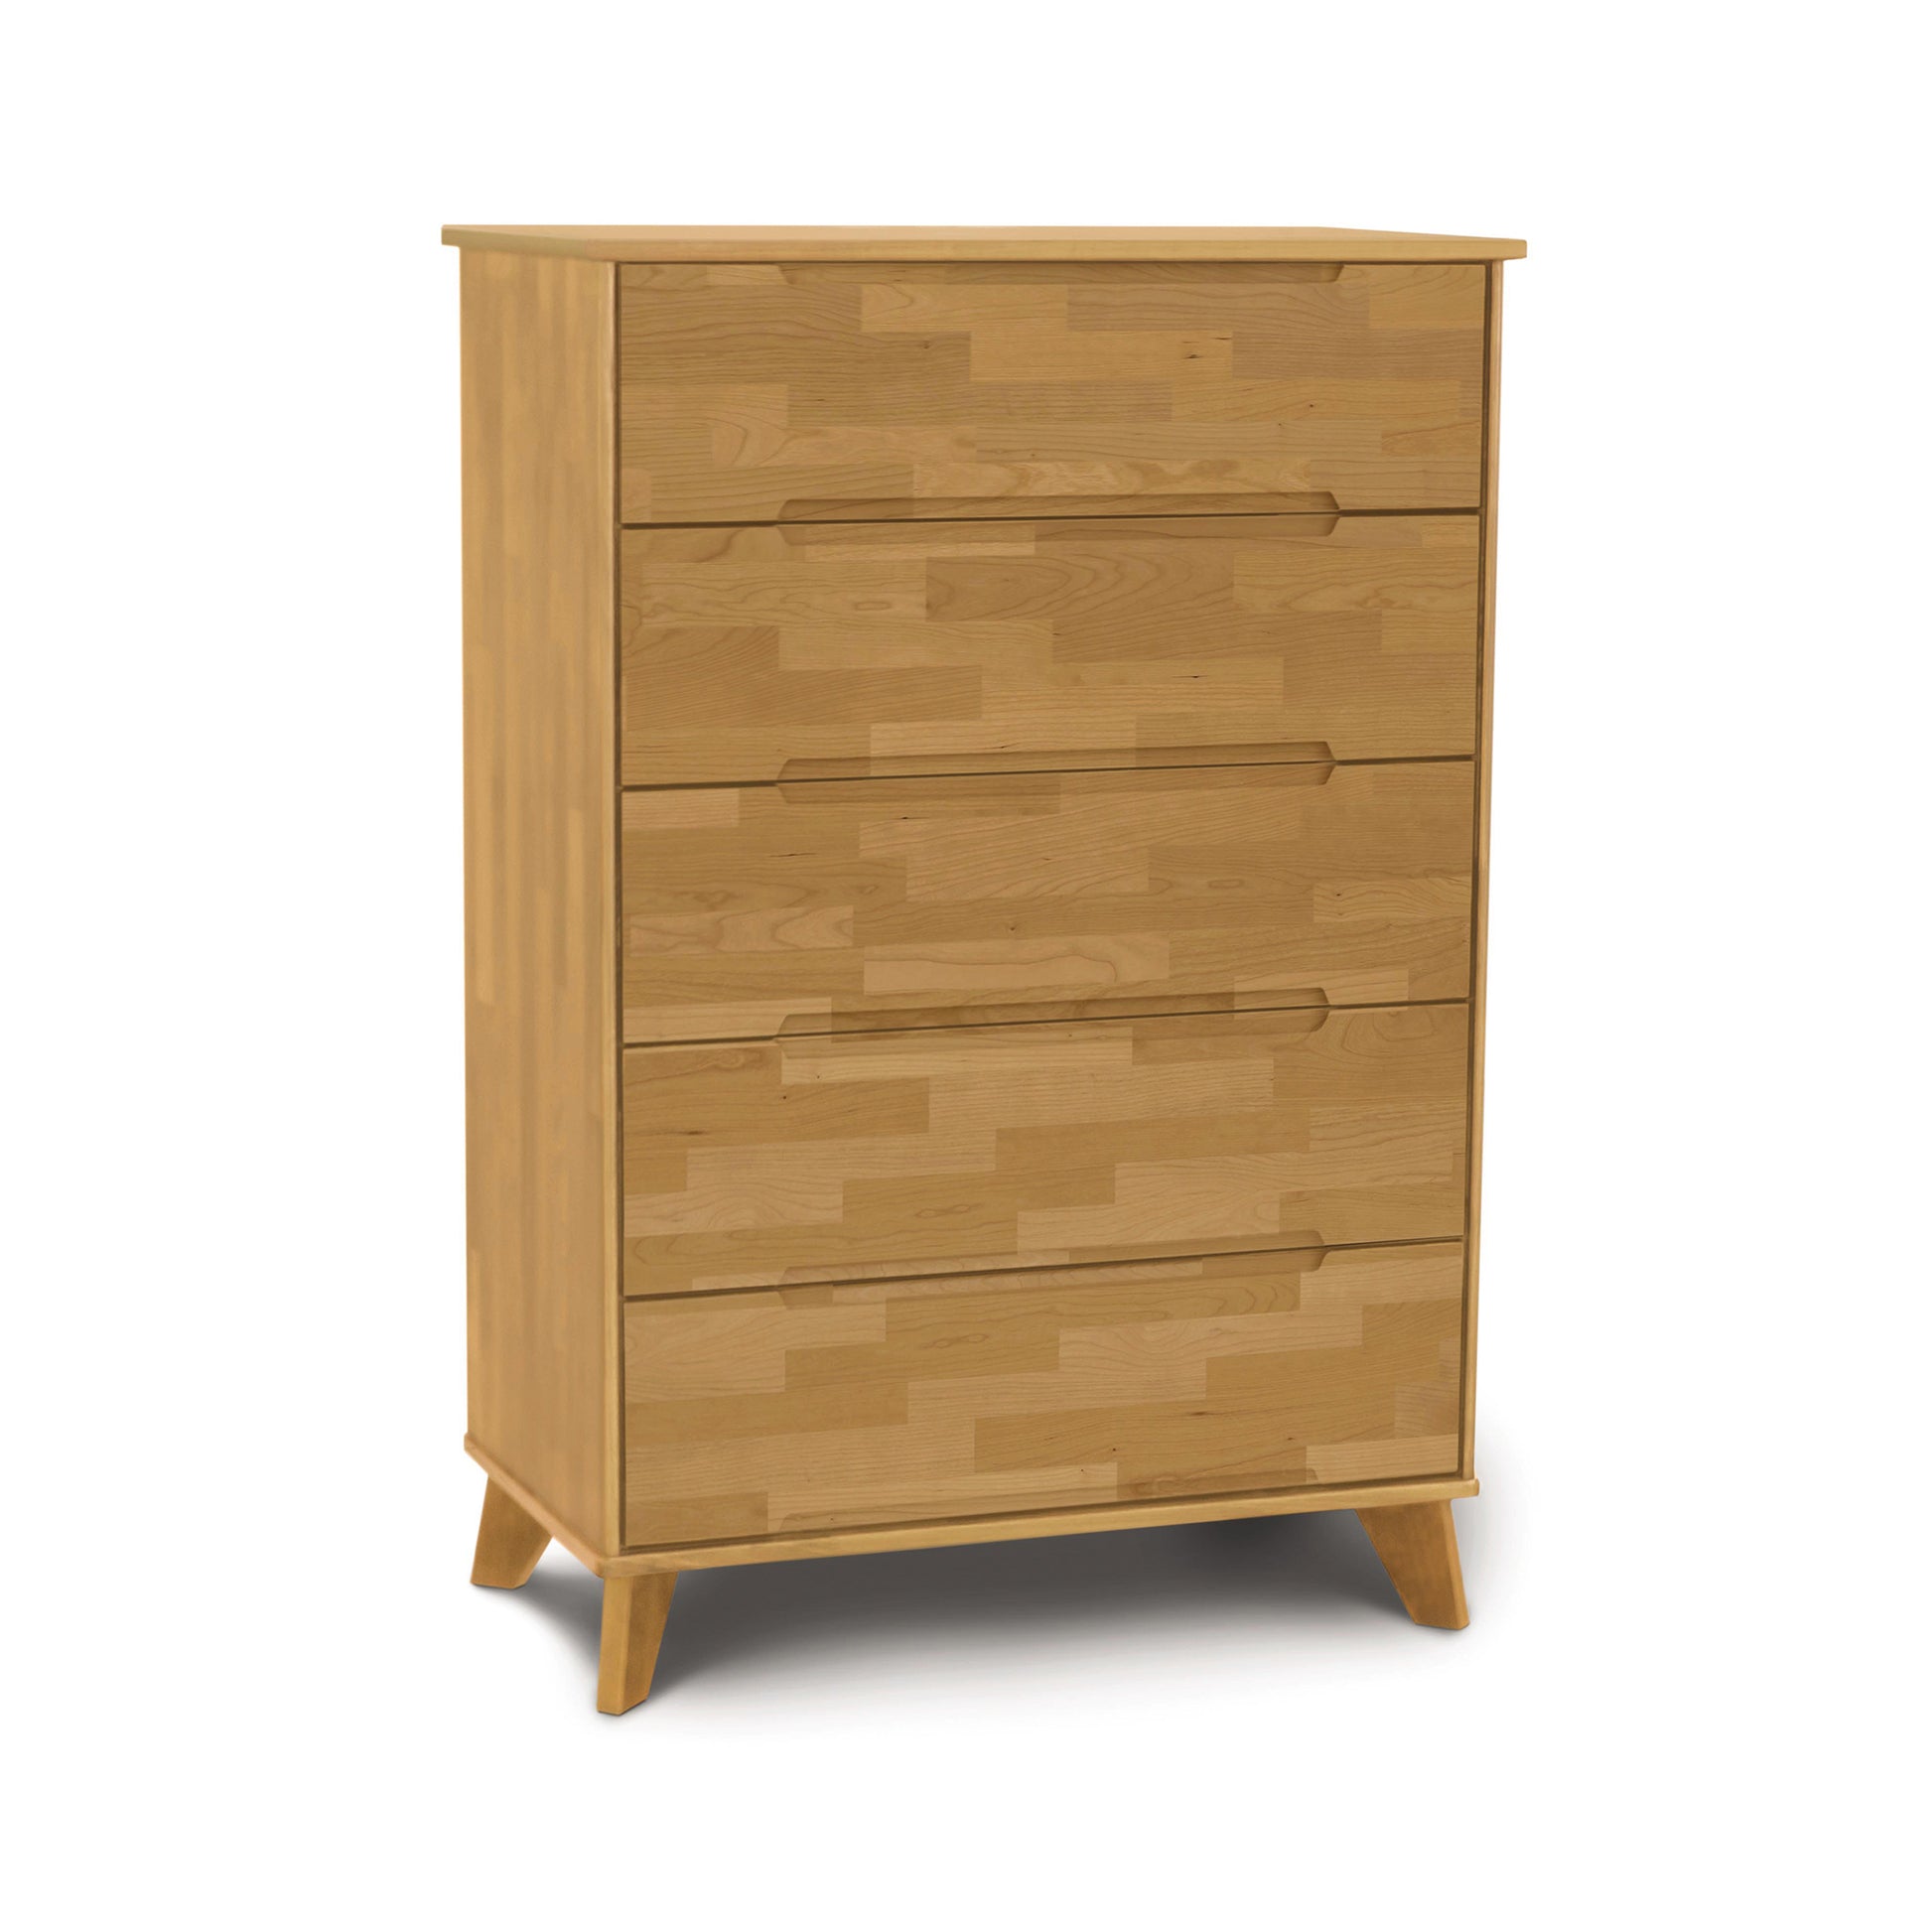 A Linn 5-Drawer Wide Chest - Priority Ship dresser by Copeland Furniture on a white background.